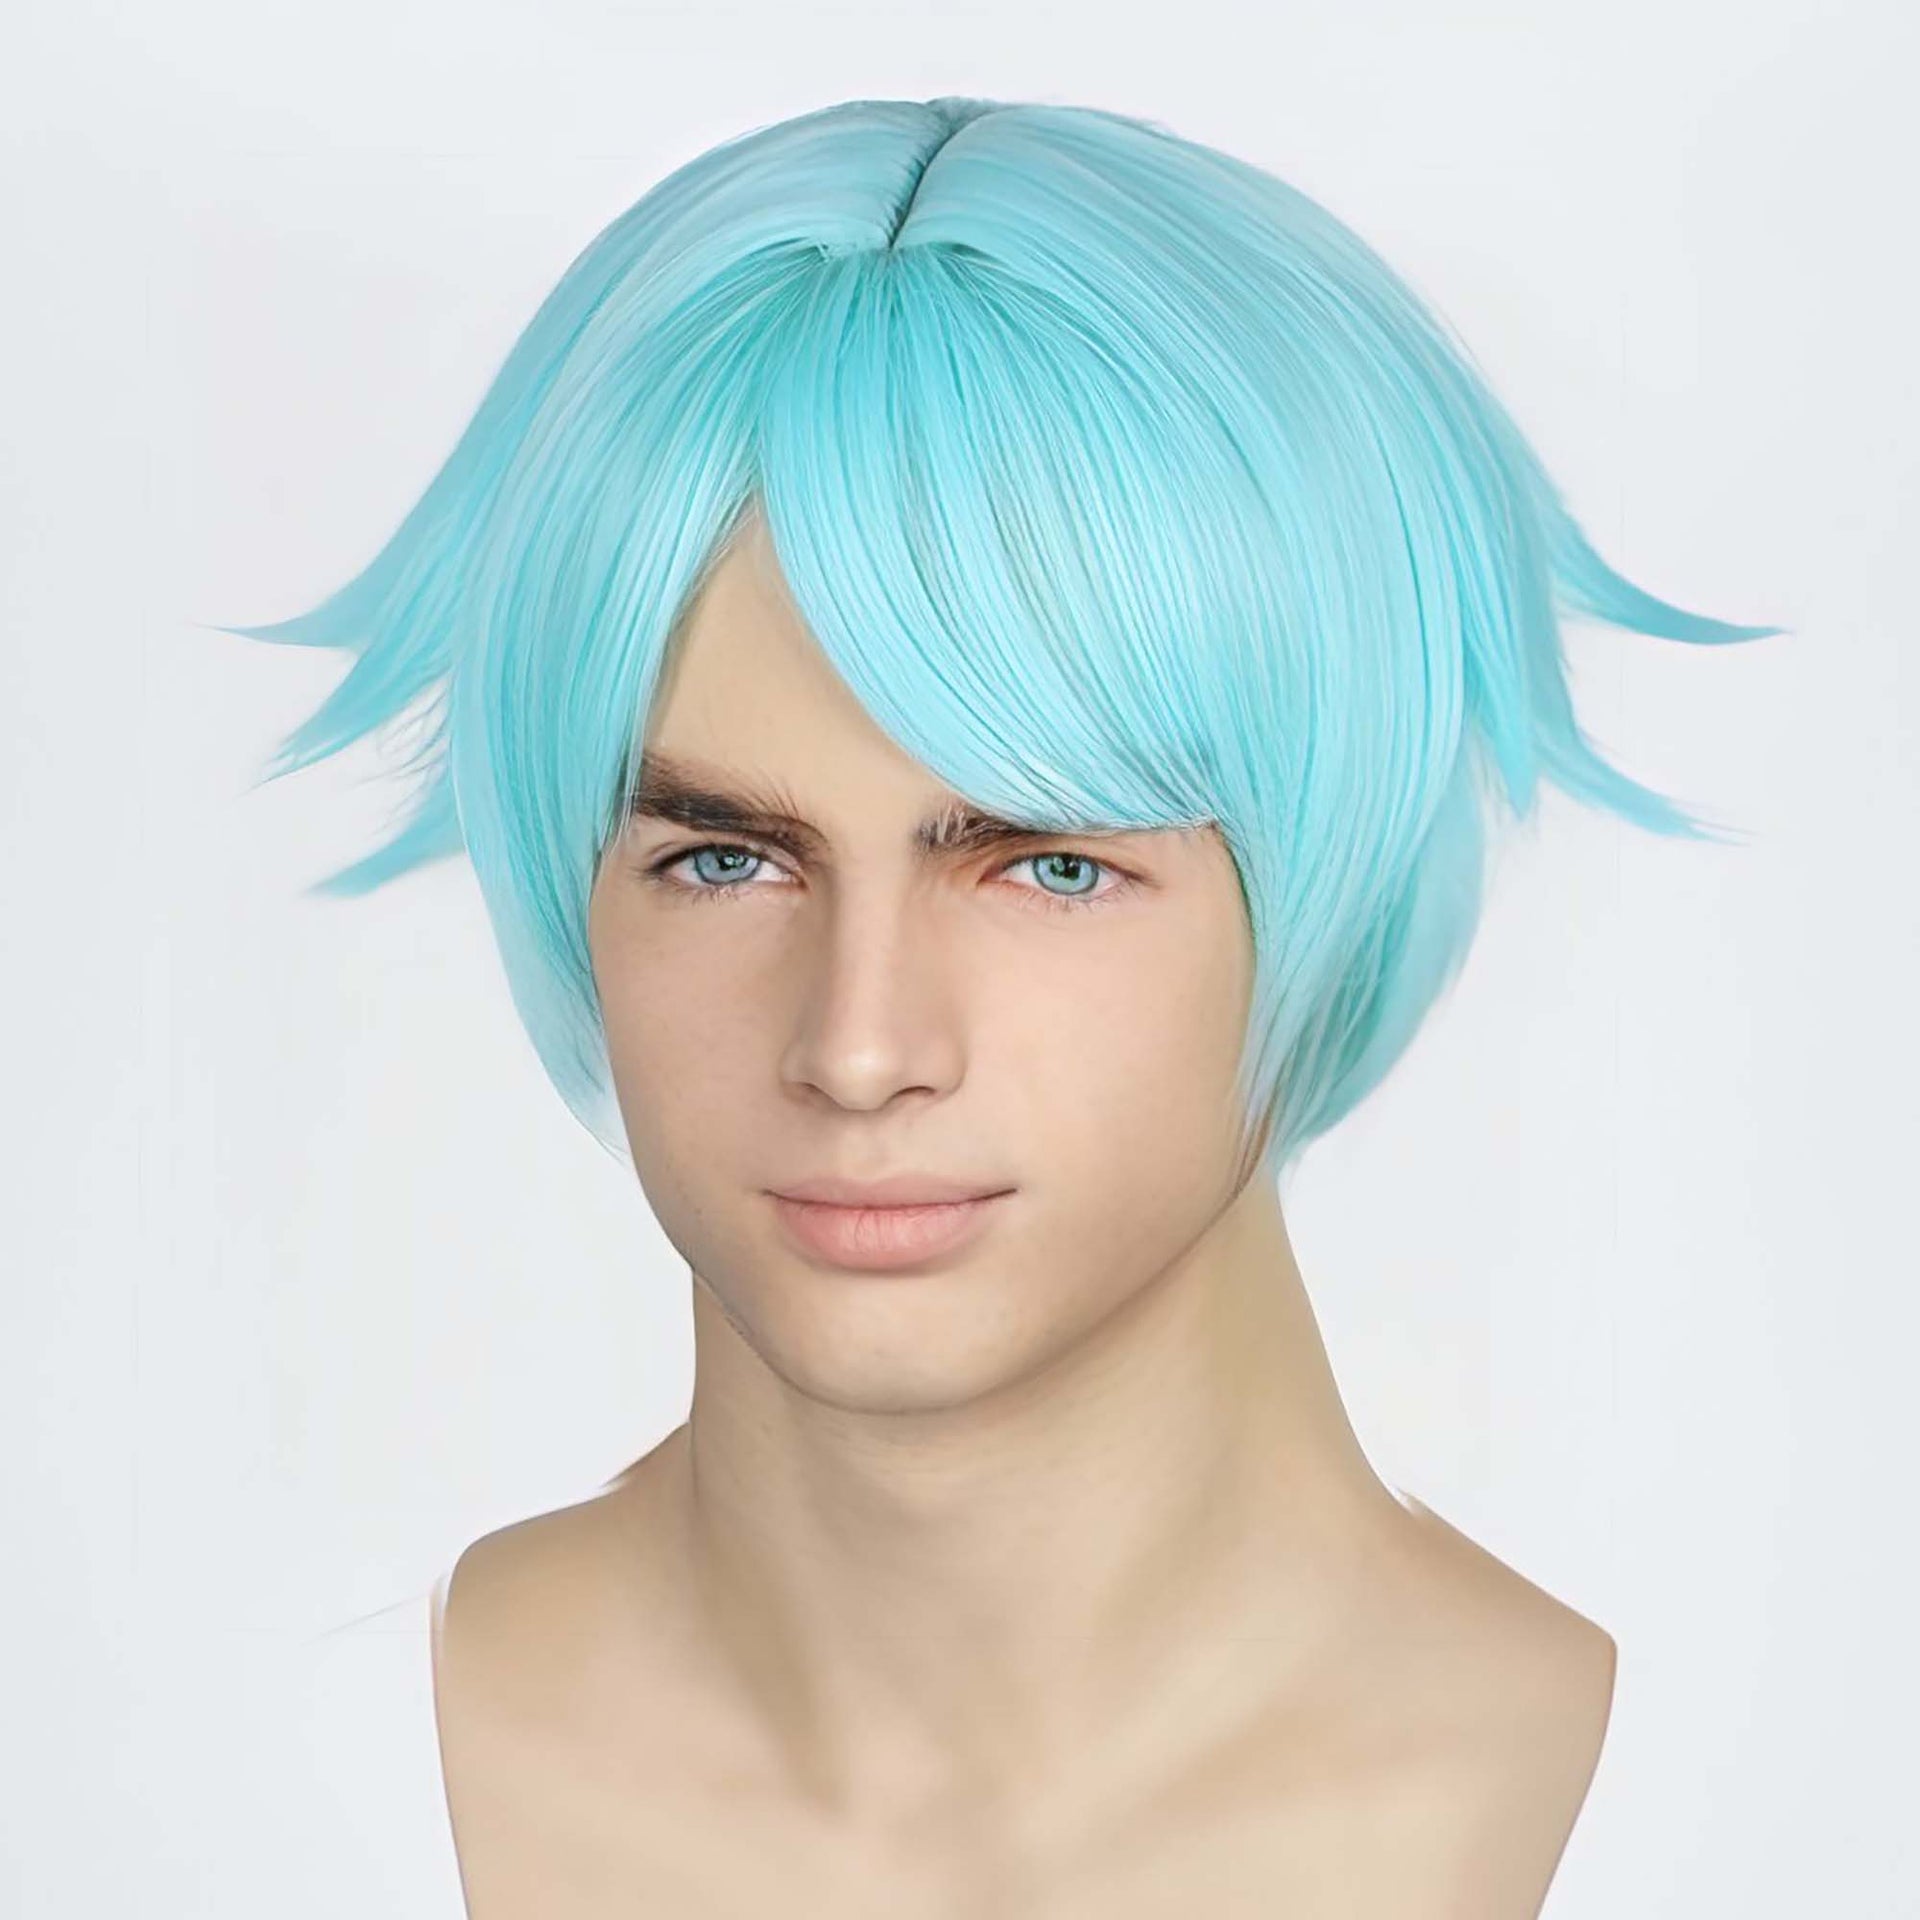 nevermindyrhead Men Aqua Blue Short Straight Fringe Bangs Anime Cosplay Wig With Top Parting